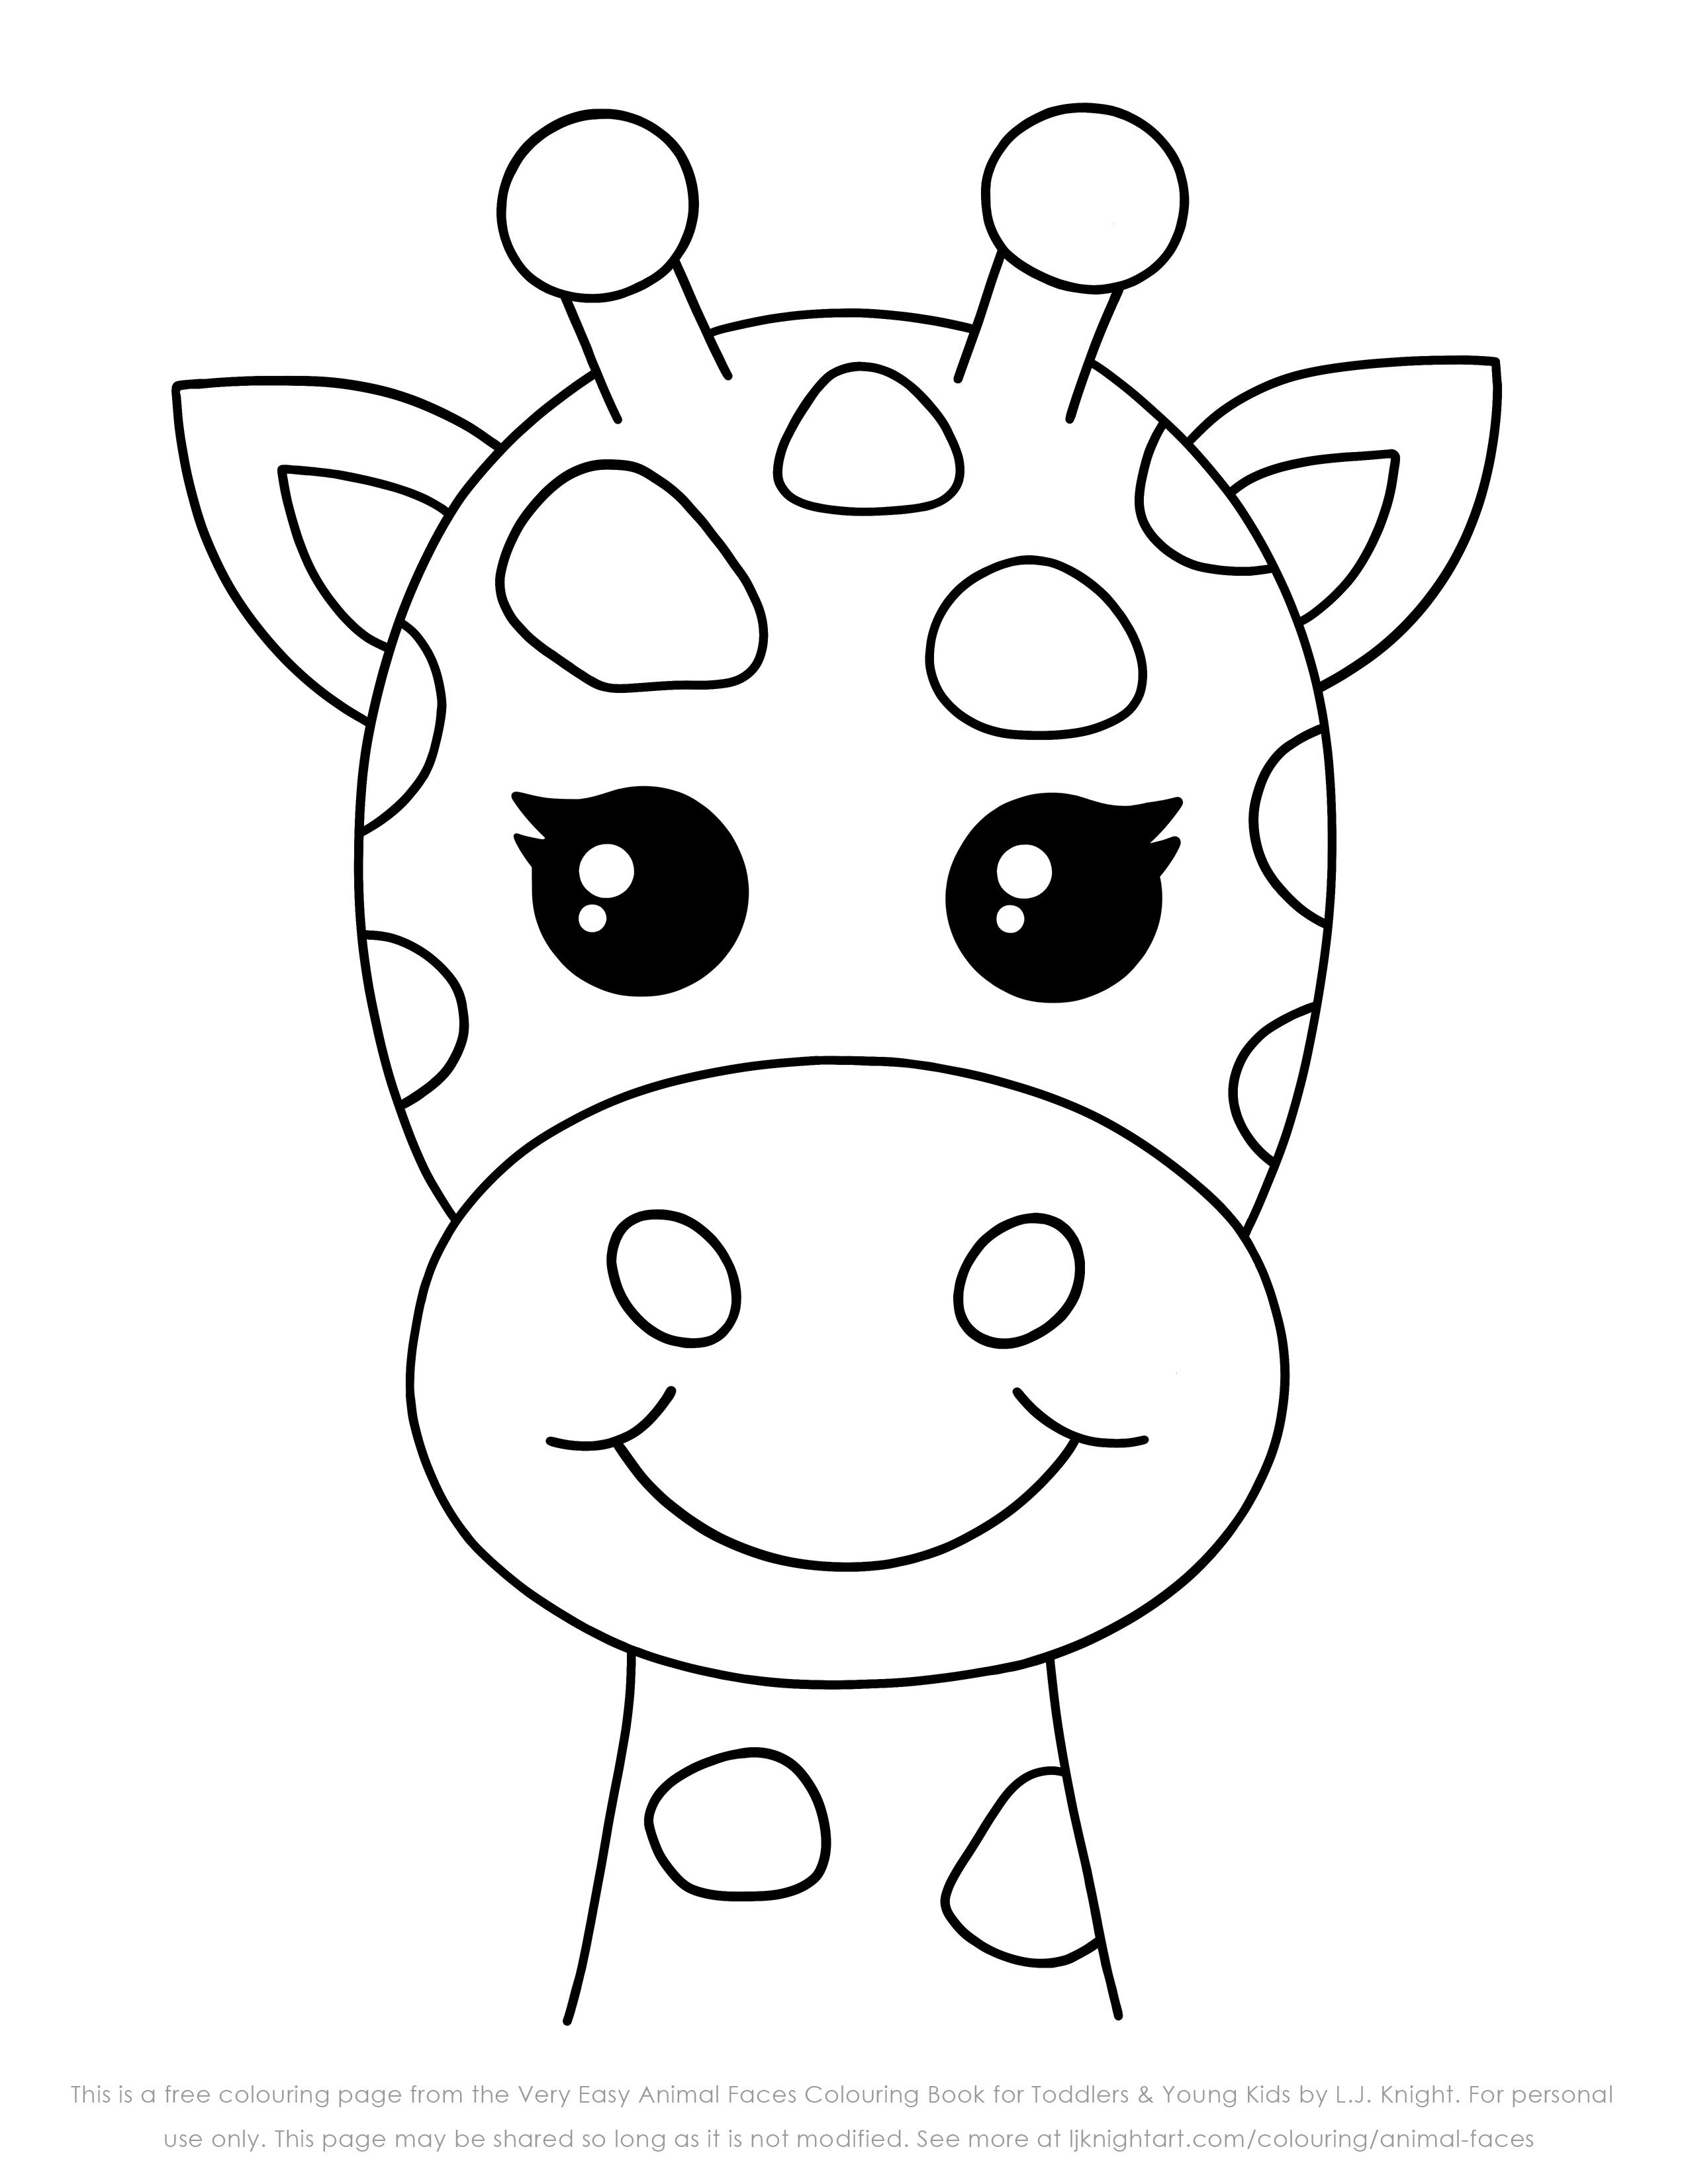 LJKnight Very Easy Animal Faces Free Colouring Page